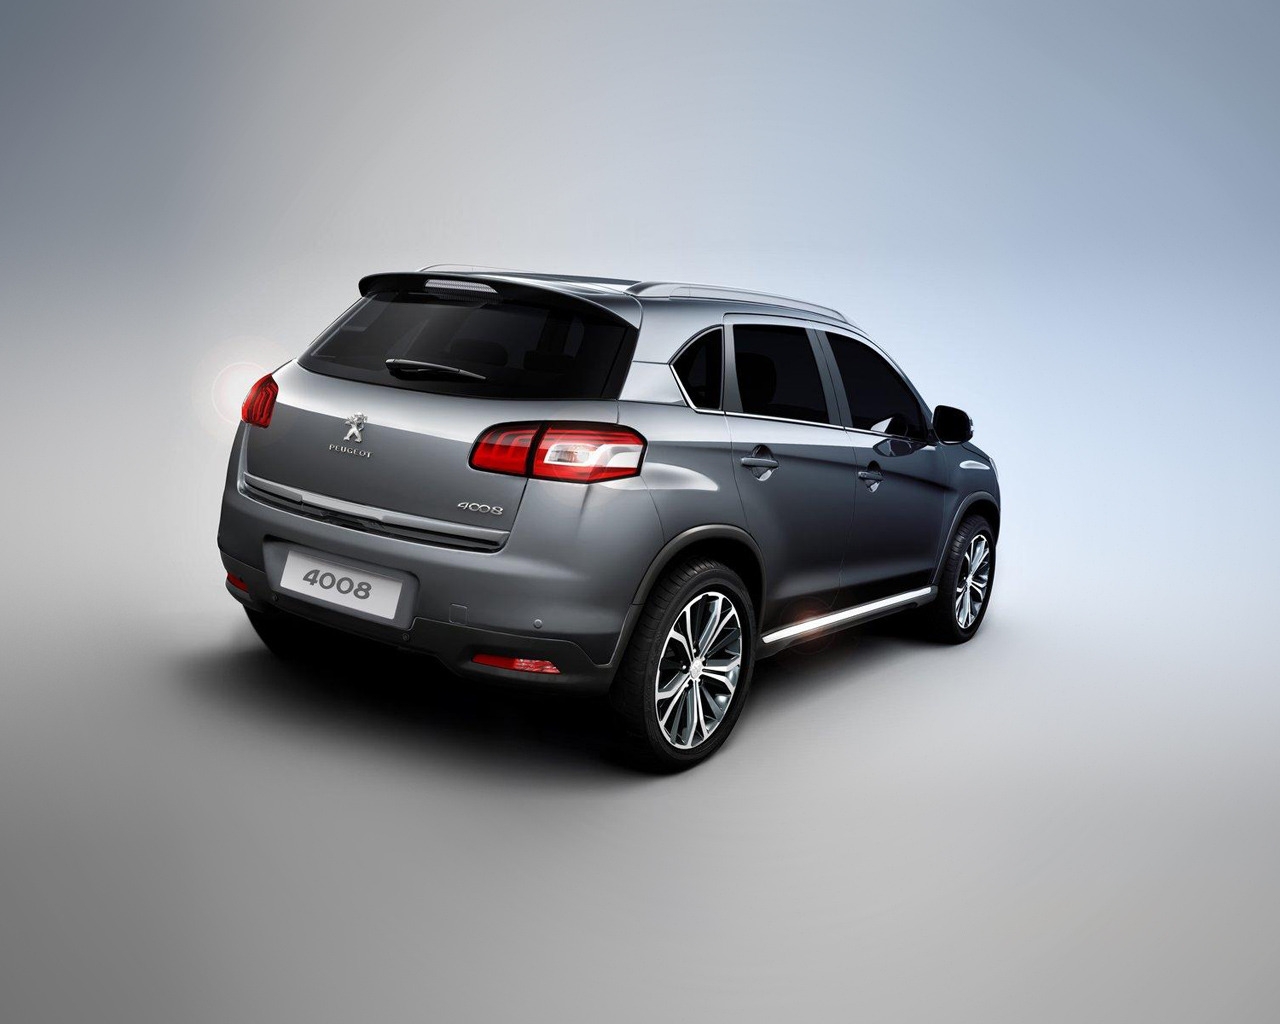 2012 Peugeot 4008 Rear for 1280 x 1024 resolution